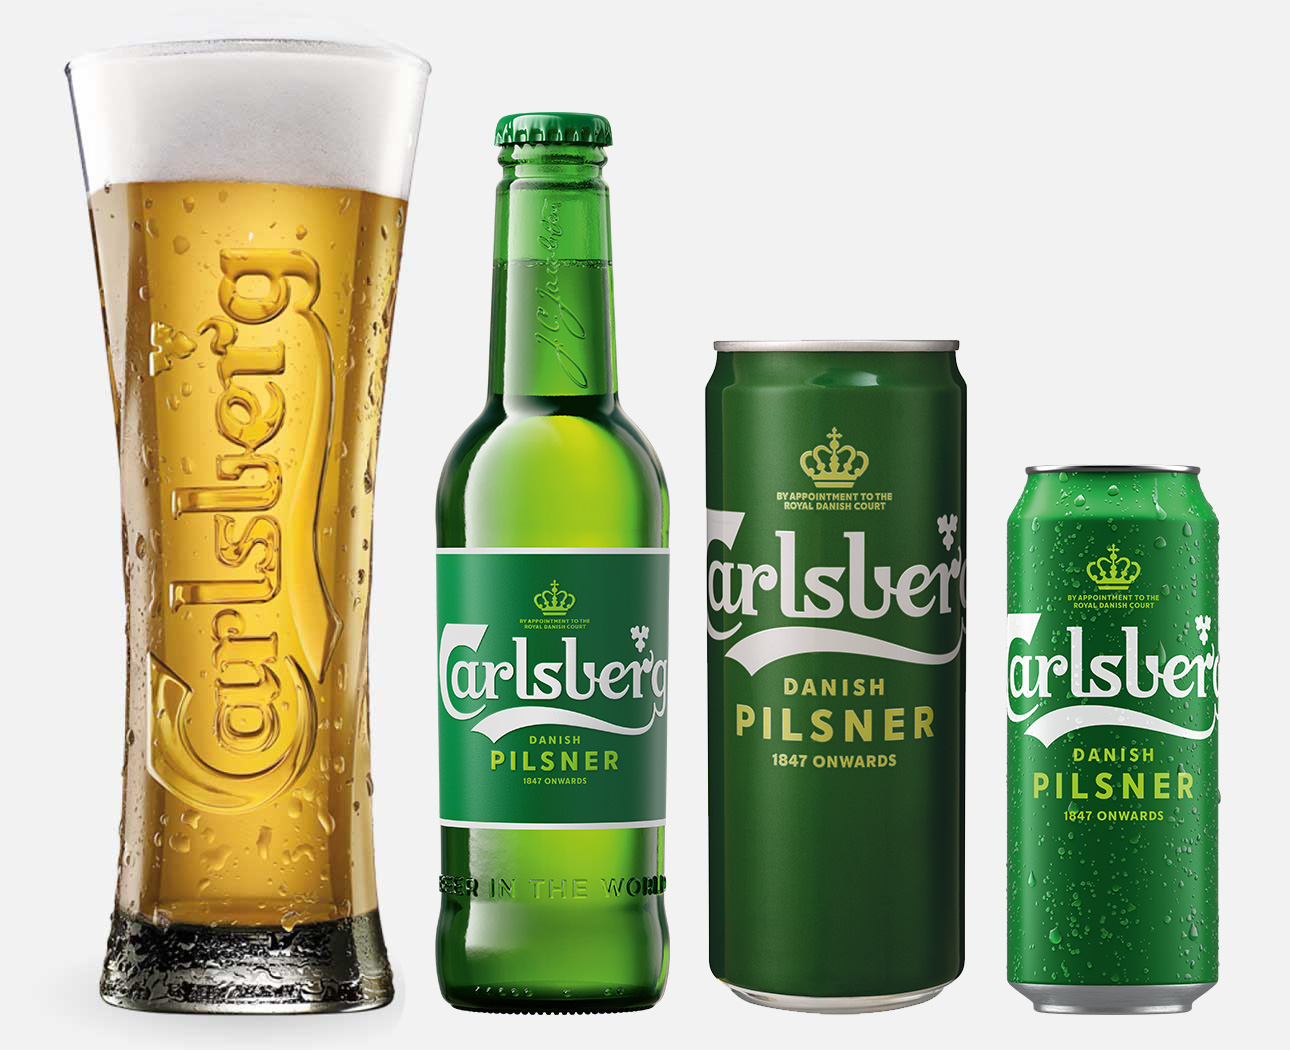 Carlsberg's containers